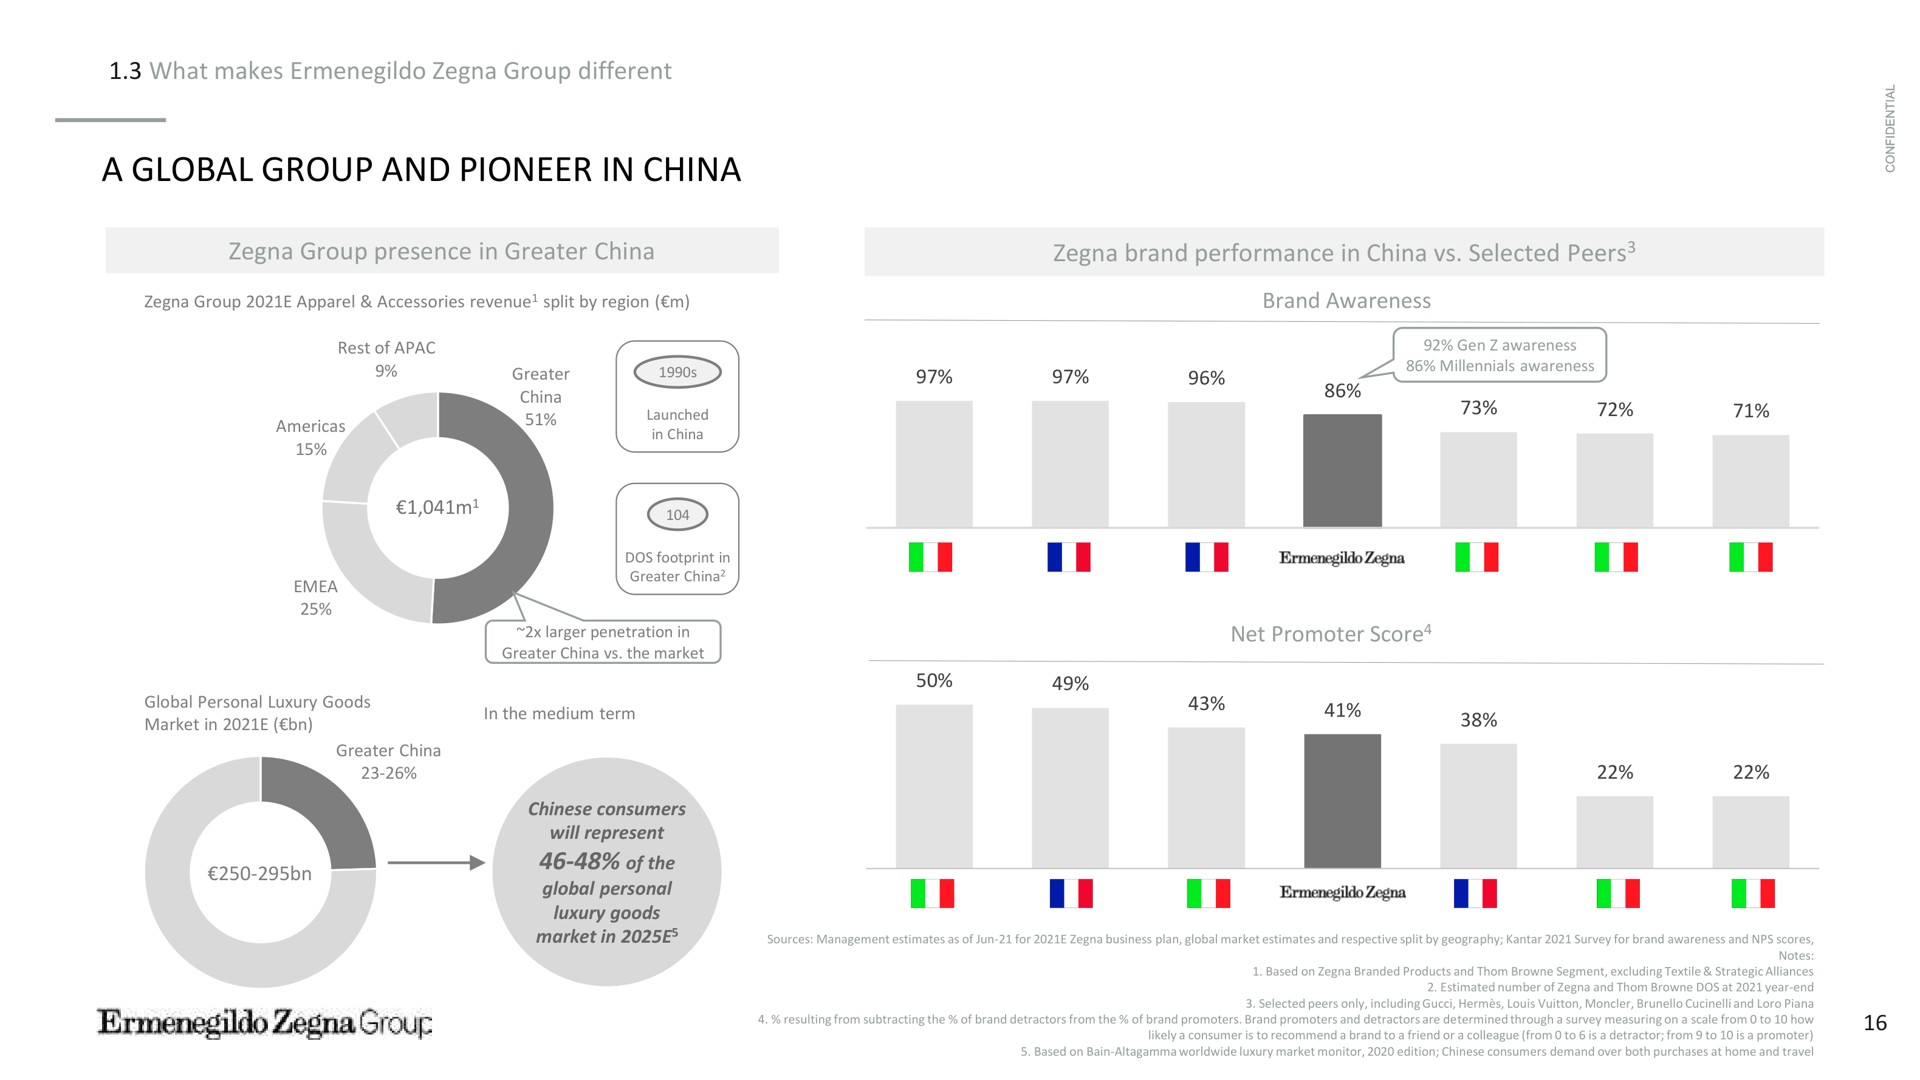 what makes group different a global group and pioneer in china group presence in greater china brand performance in china selected peers category category category category category category category category peers market the medium term of the net promoter score resulting from subtracting the of detractors from the of promoters promoters detractors are determined through survey measuring on scale from to how | Zegna